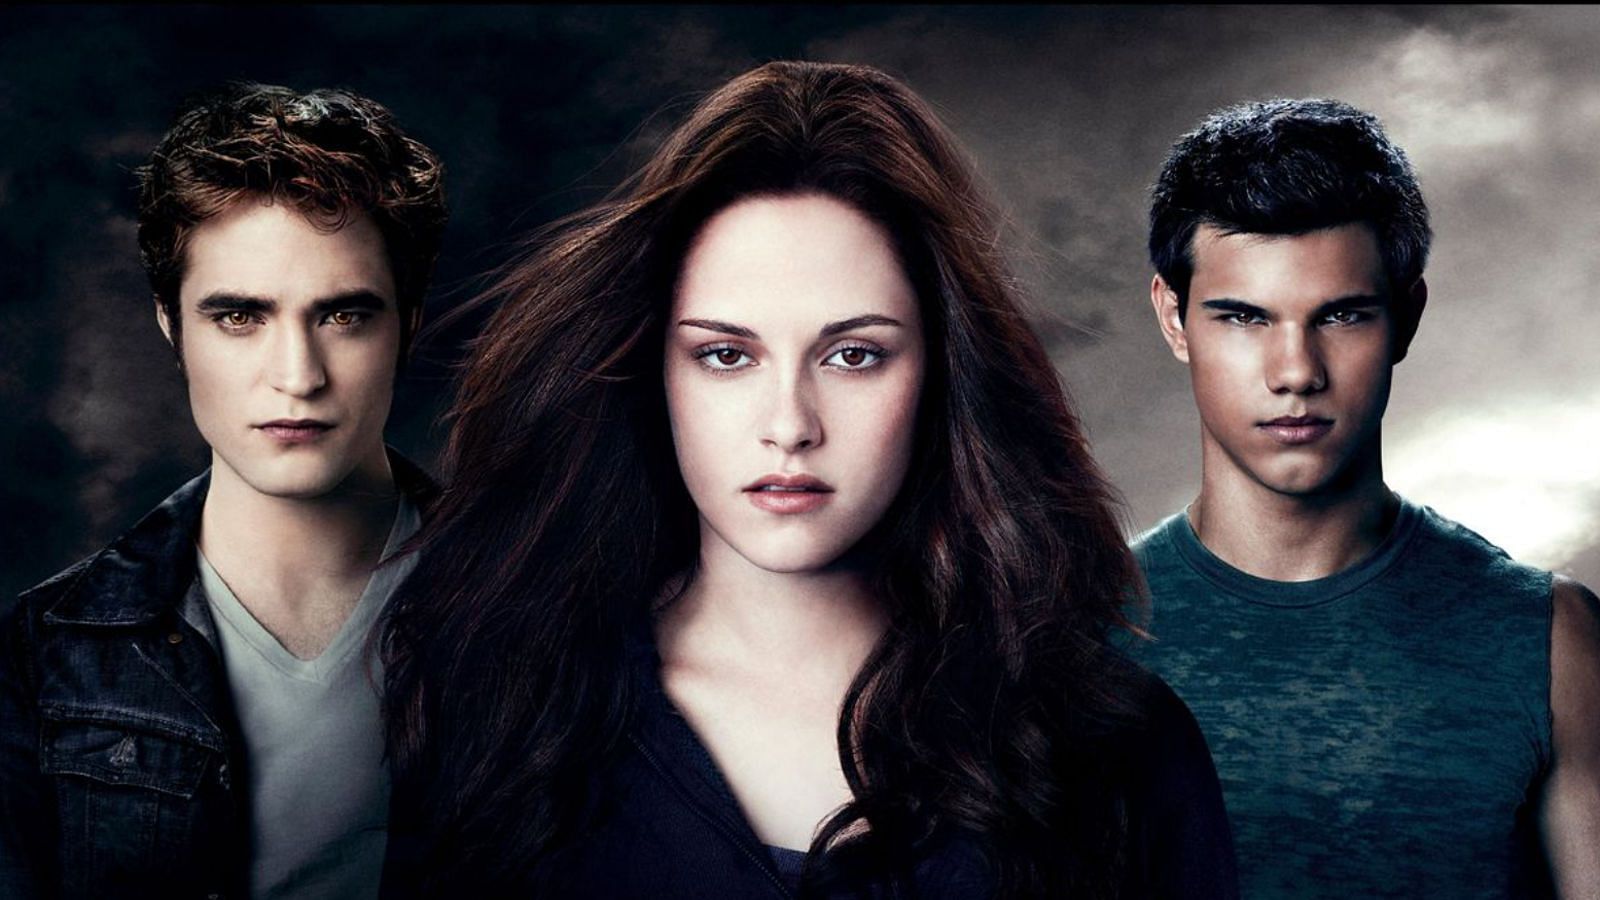 Will there be another Twilight movie? Exploring the possibility of a